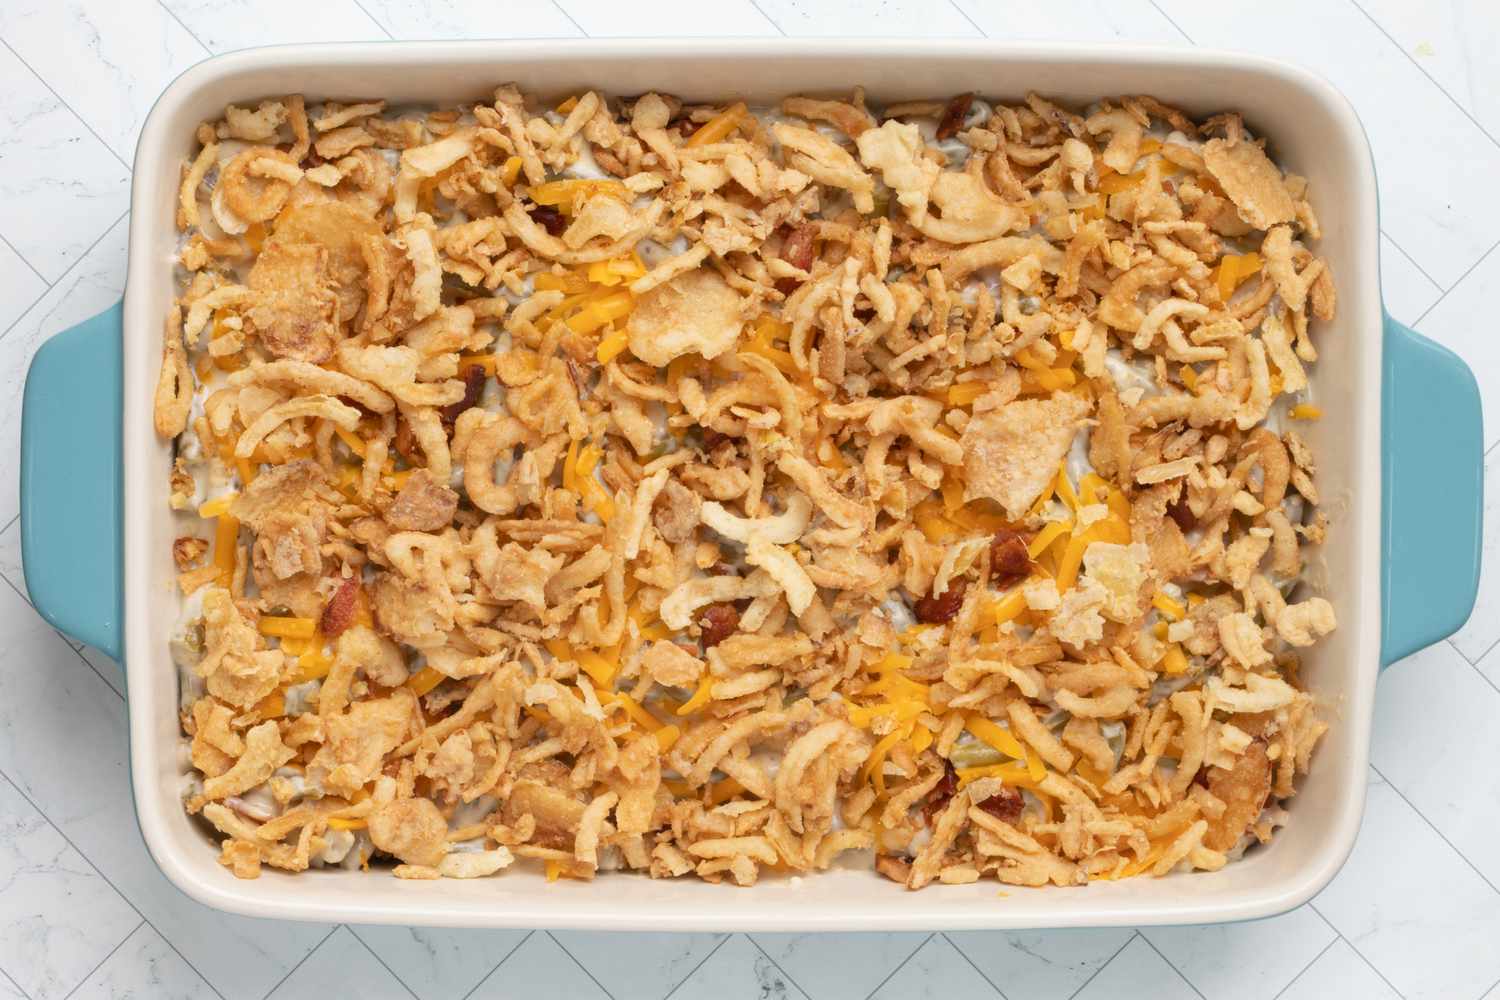 bacon and cheddar green bean casserole is topped with crispy french fried onions